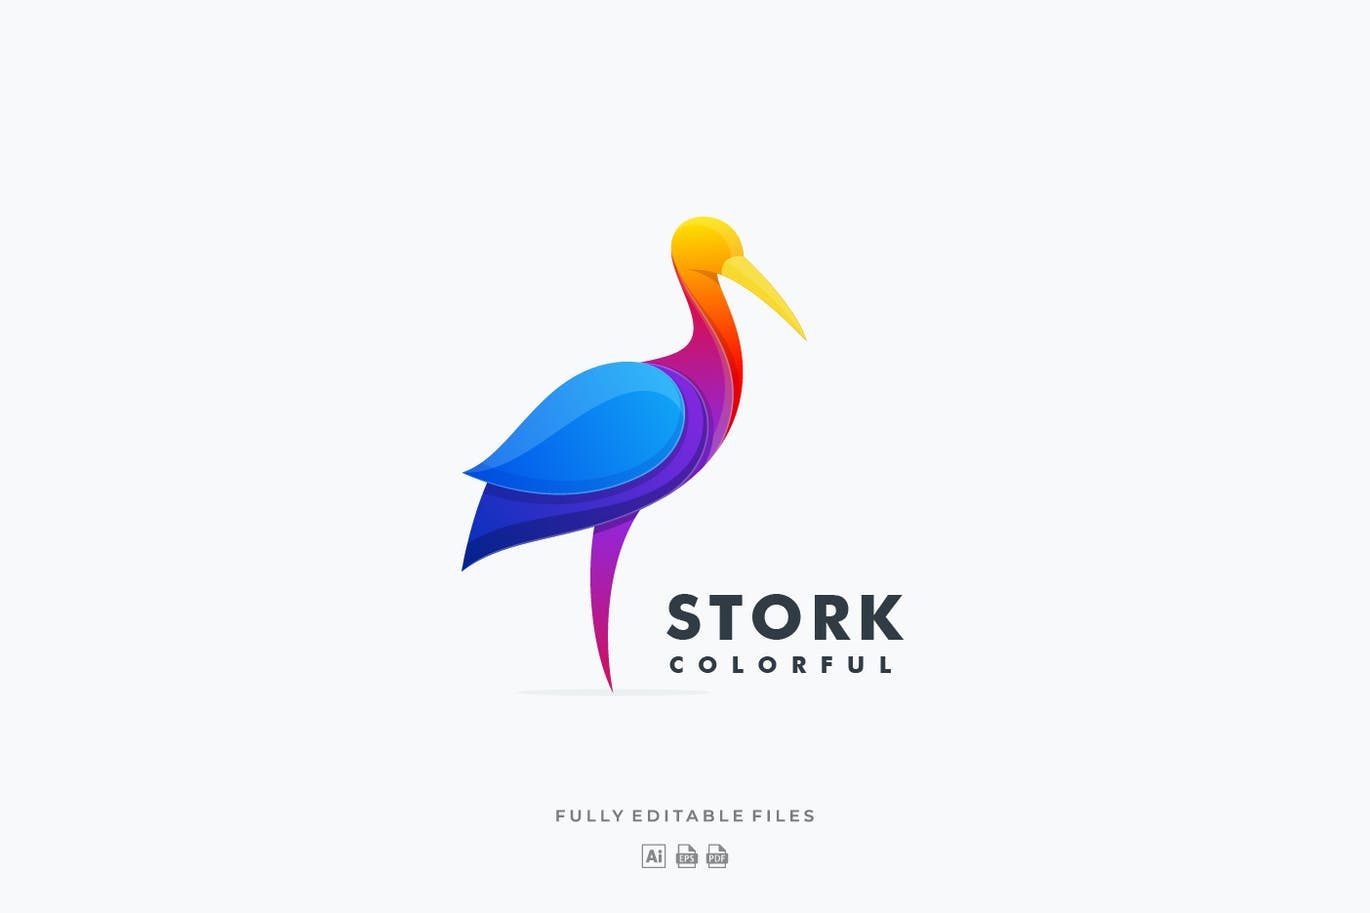 A colorful stork logo template